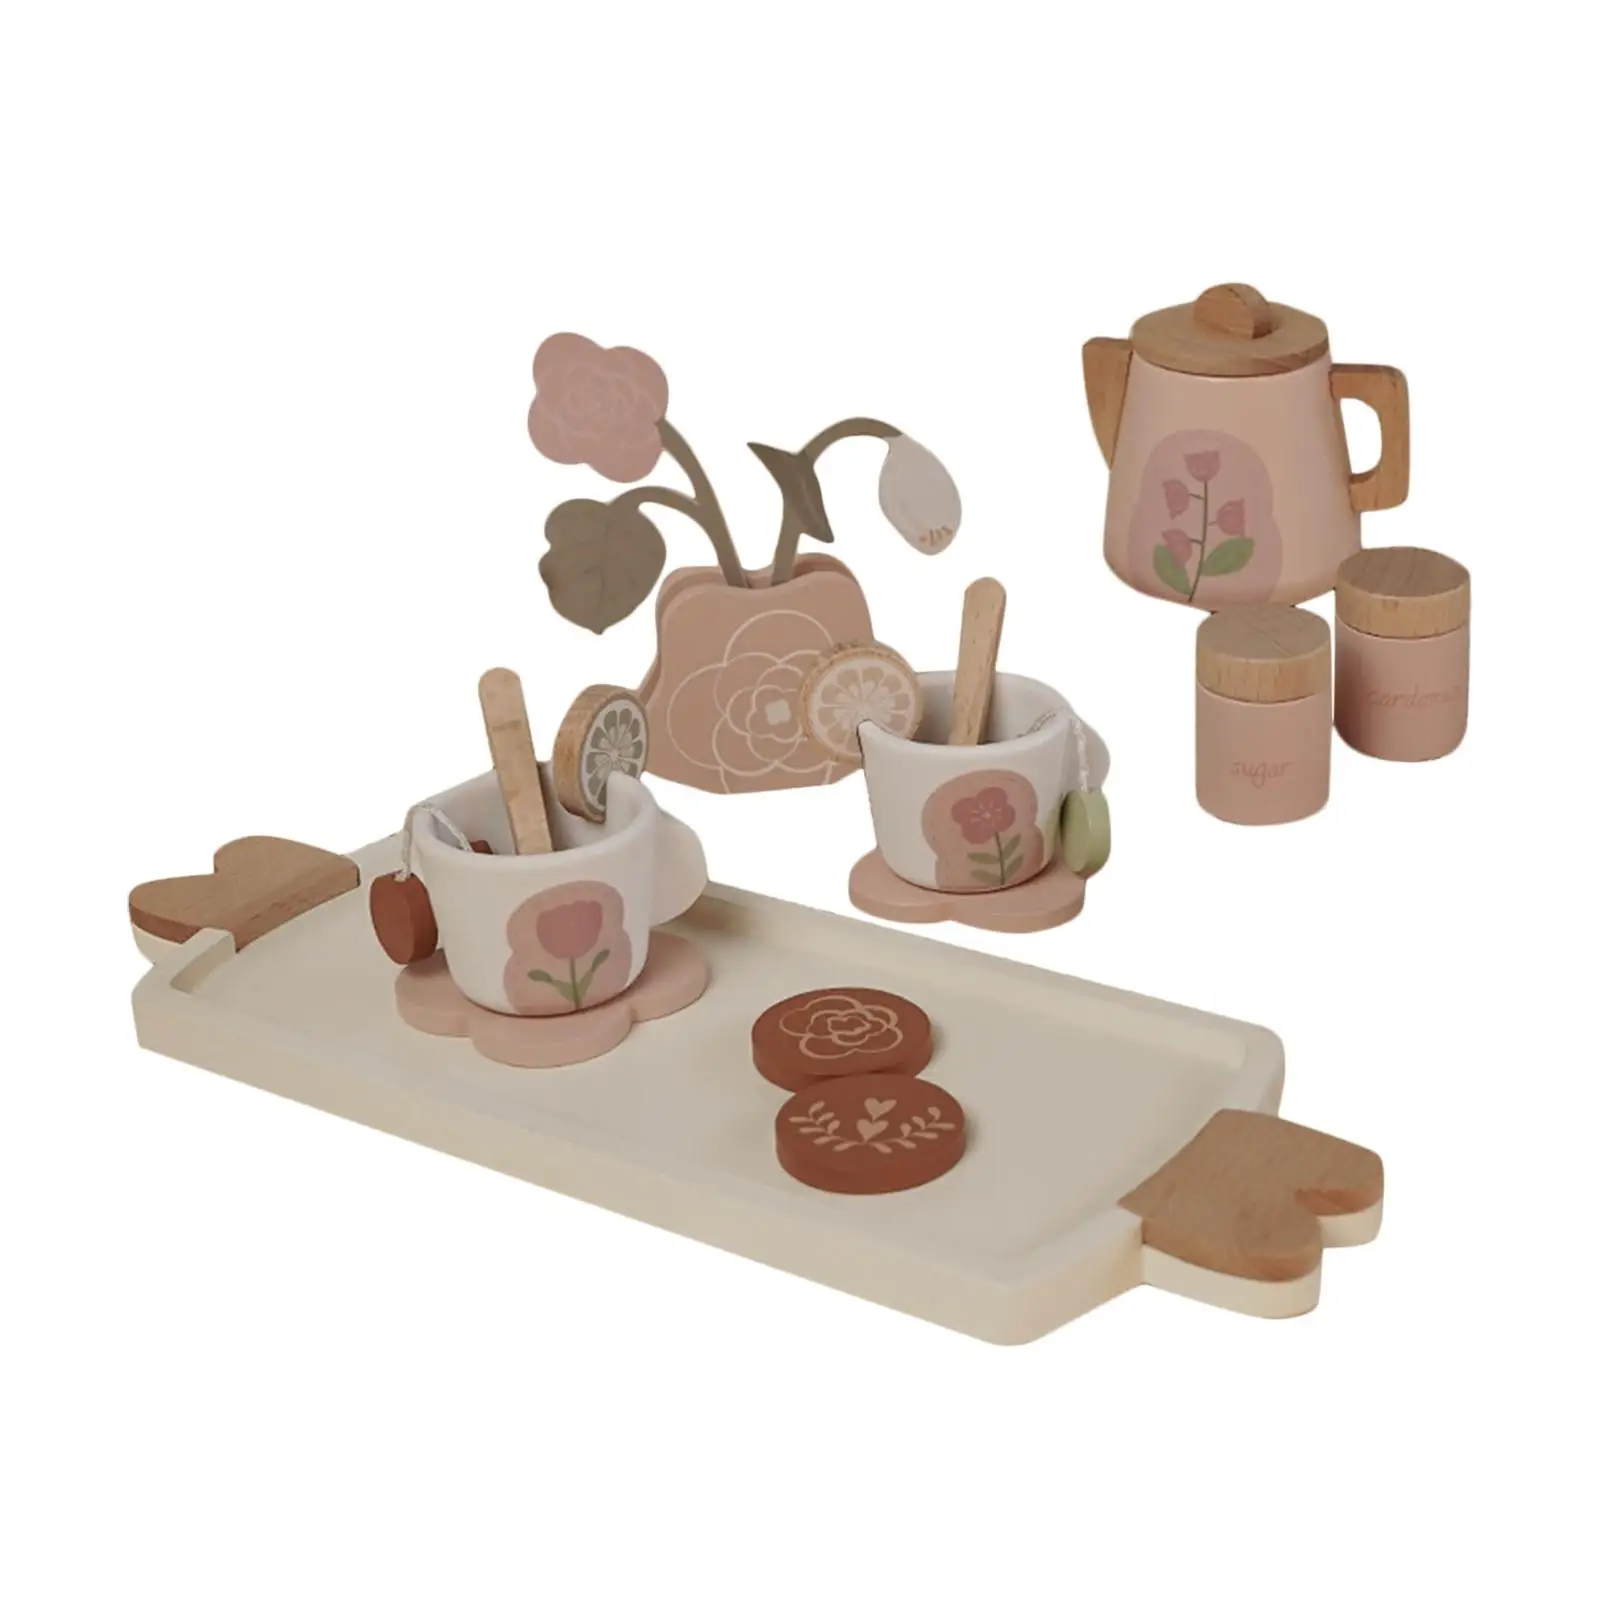 Wood Tea Set for Little Girls Kitchen Toys Mini Toys Afternoon Tea Party Set Girls tea toy for Toddlers Kids Birthday Gifts